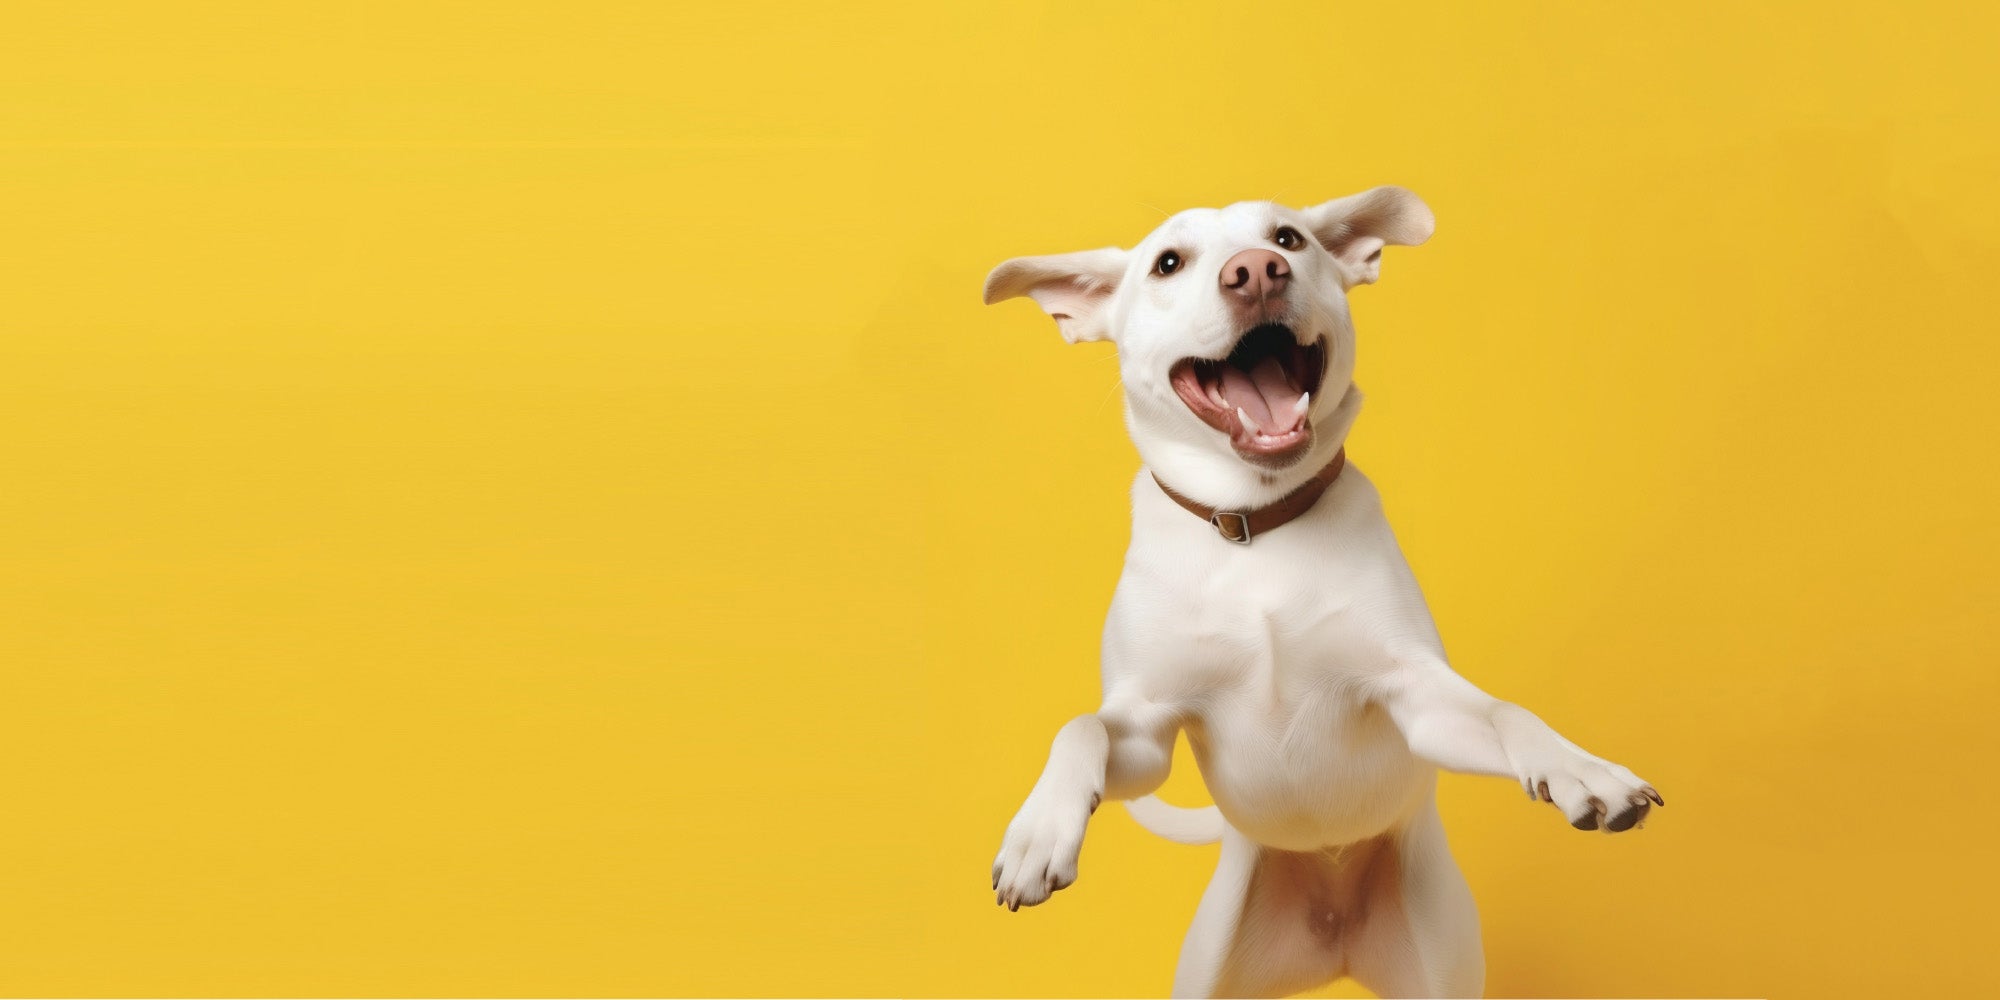 White dog jumping over a yellow background